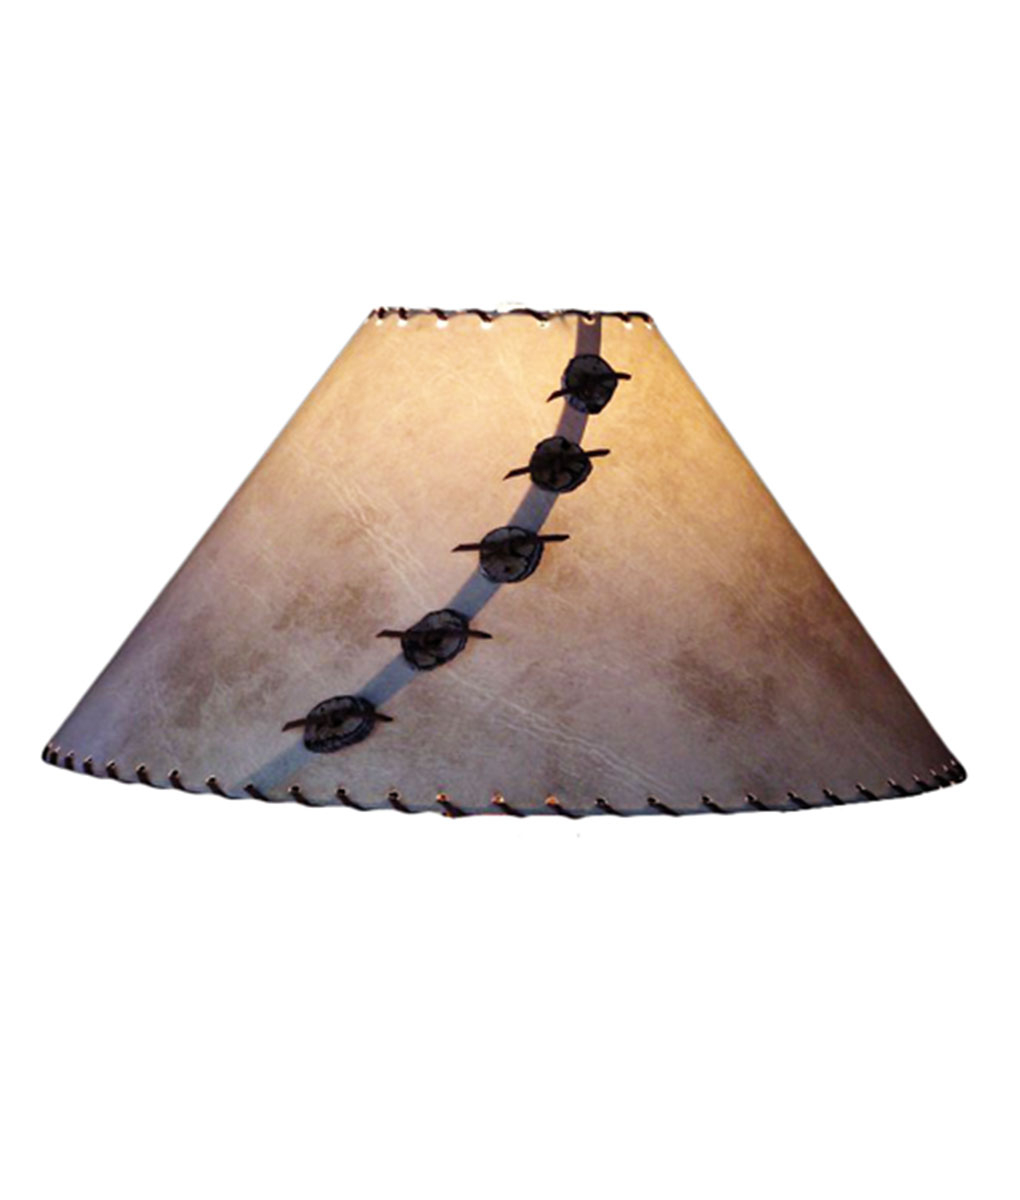 Handmade paper lamp shade rawhide glow wood buttons on